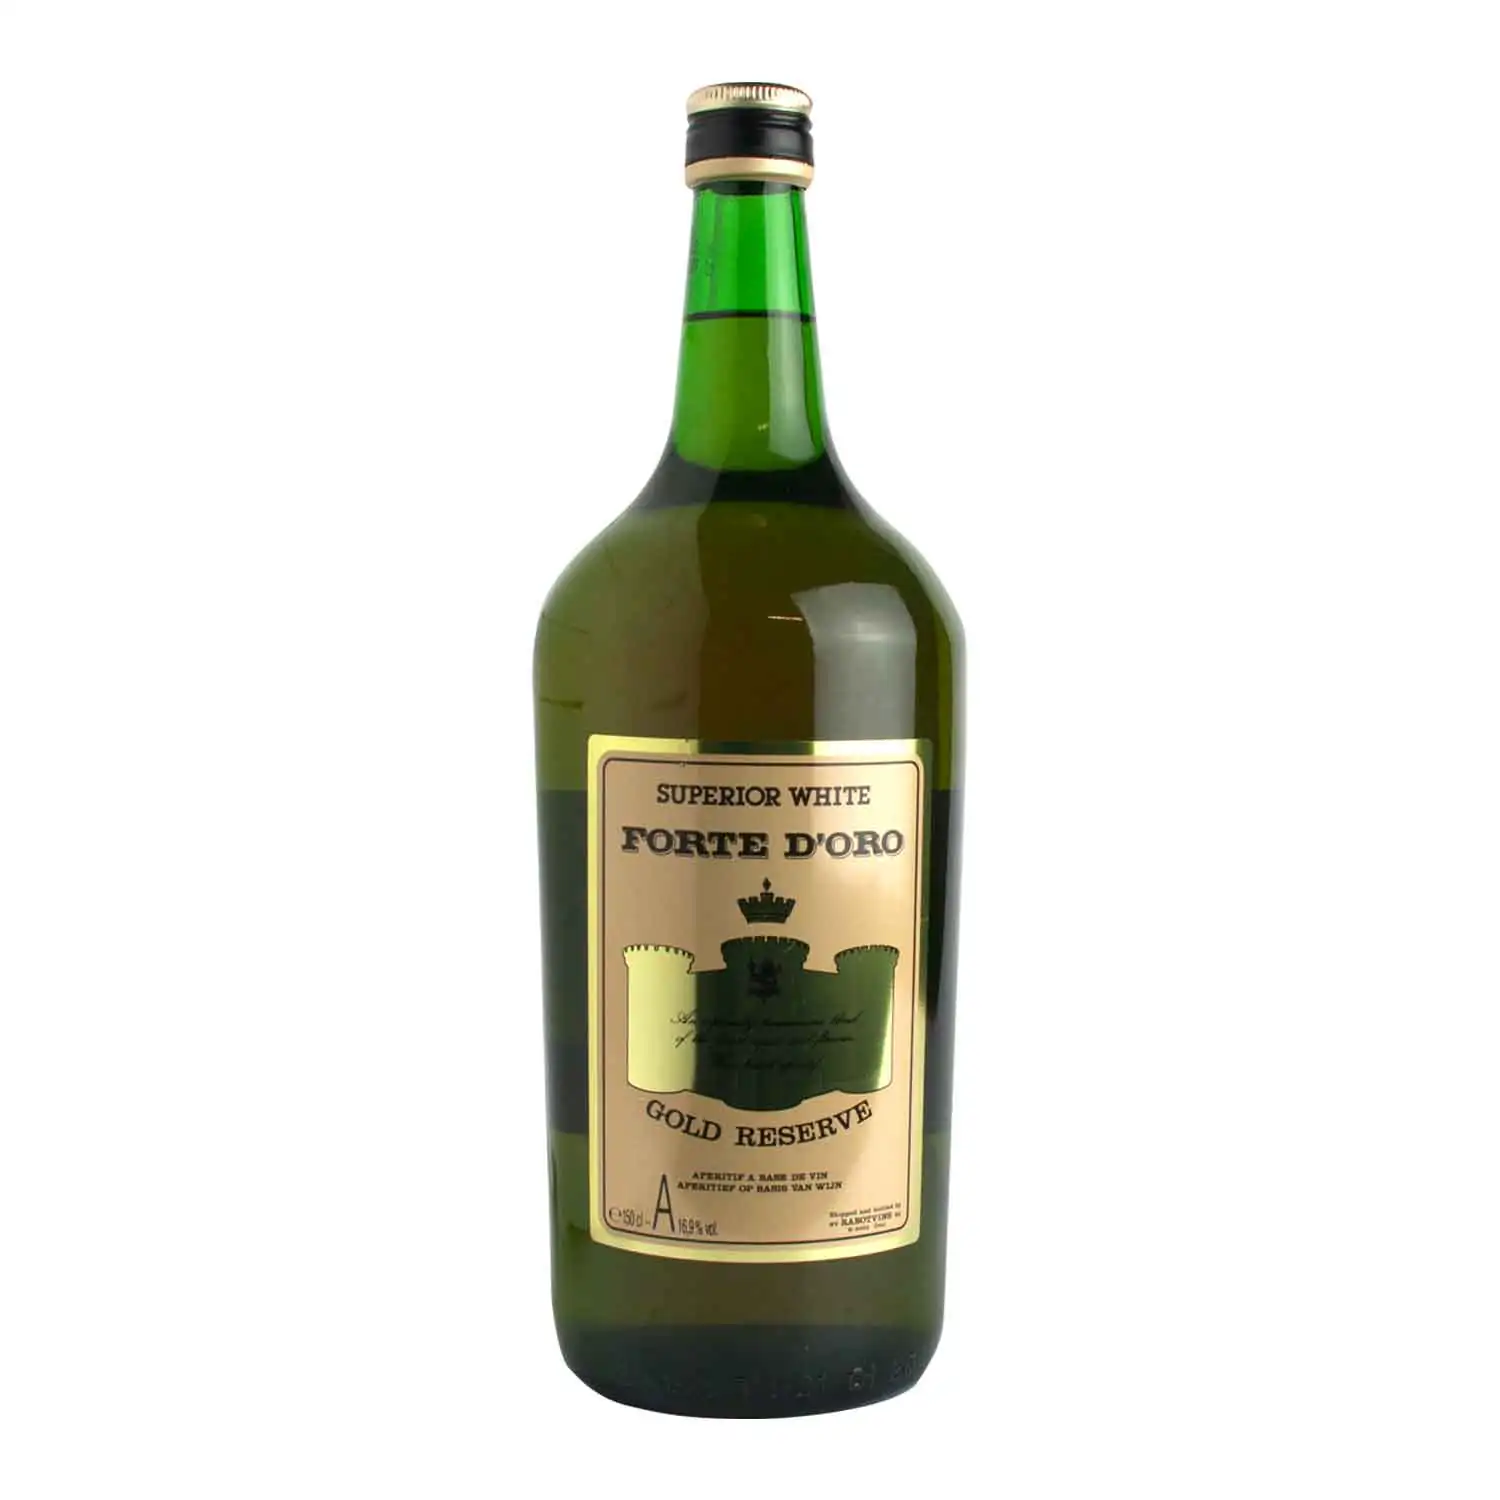 Forte d'Oro blanc 1,5l Alc 16,9% - Buy at Real Tobacco